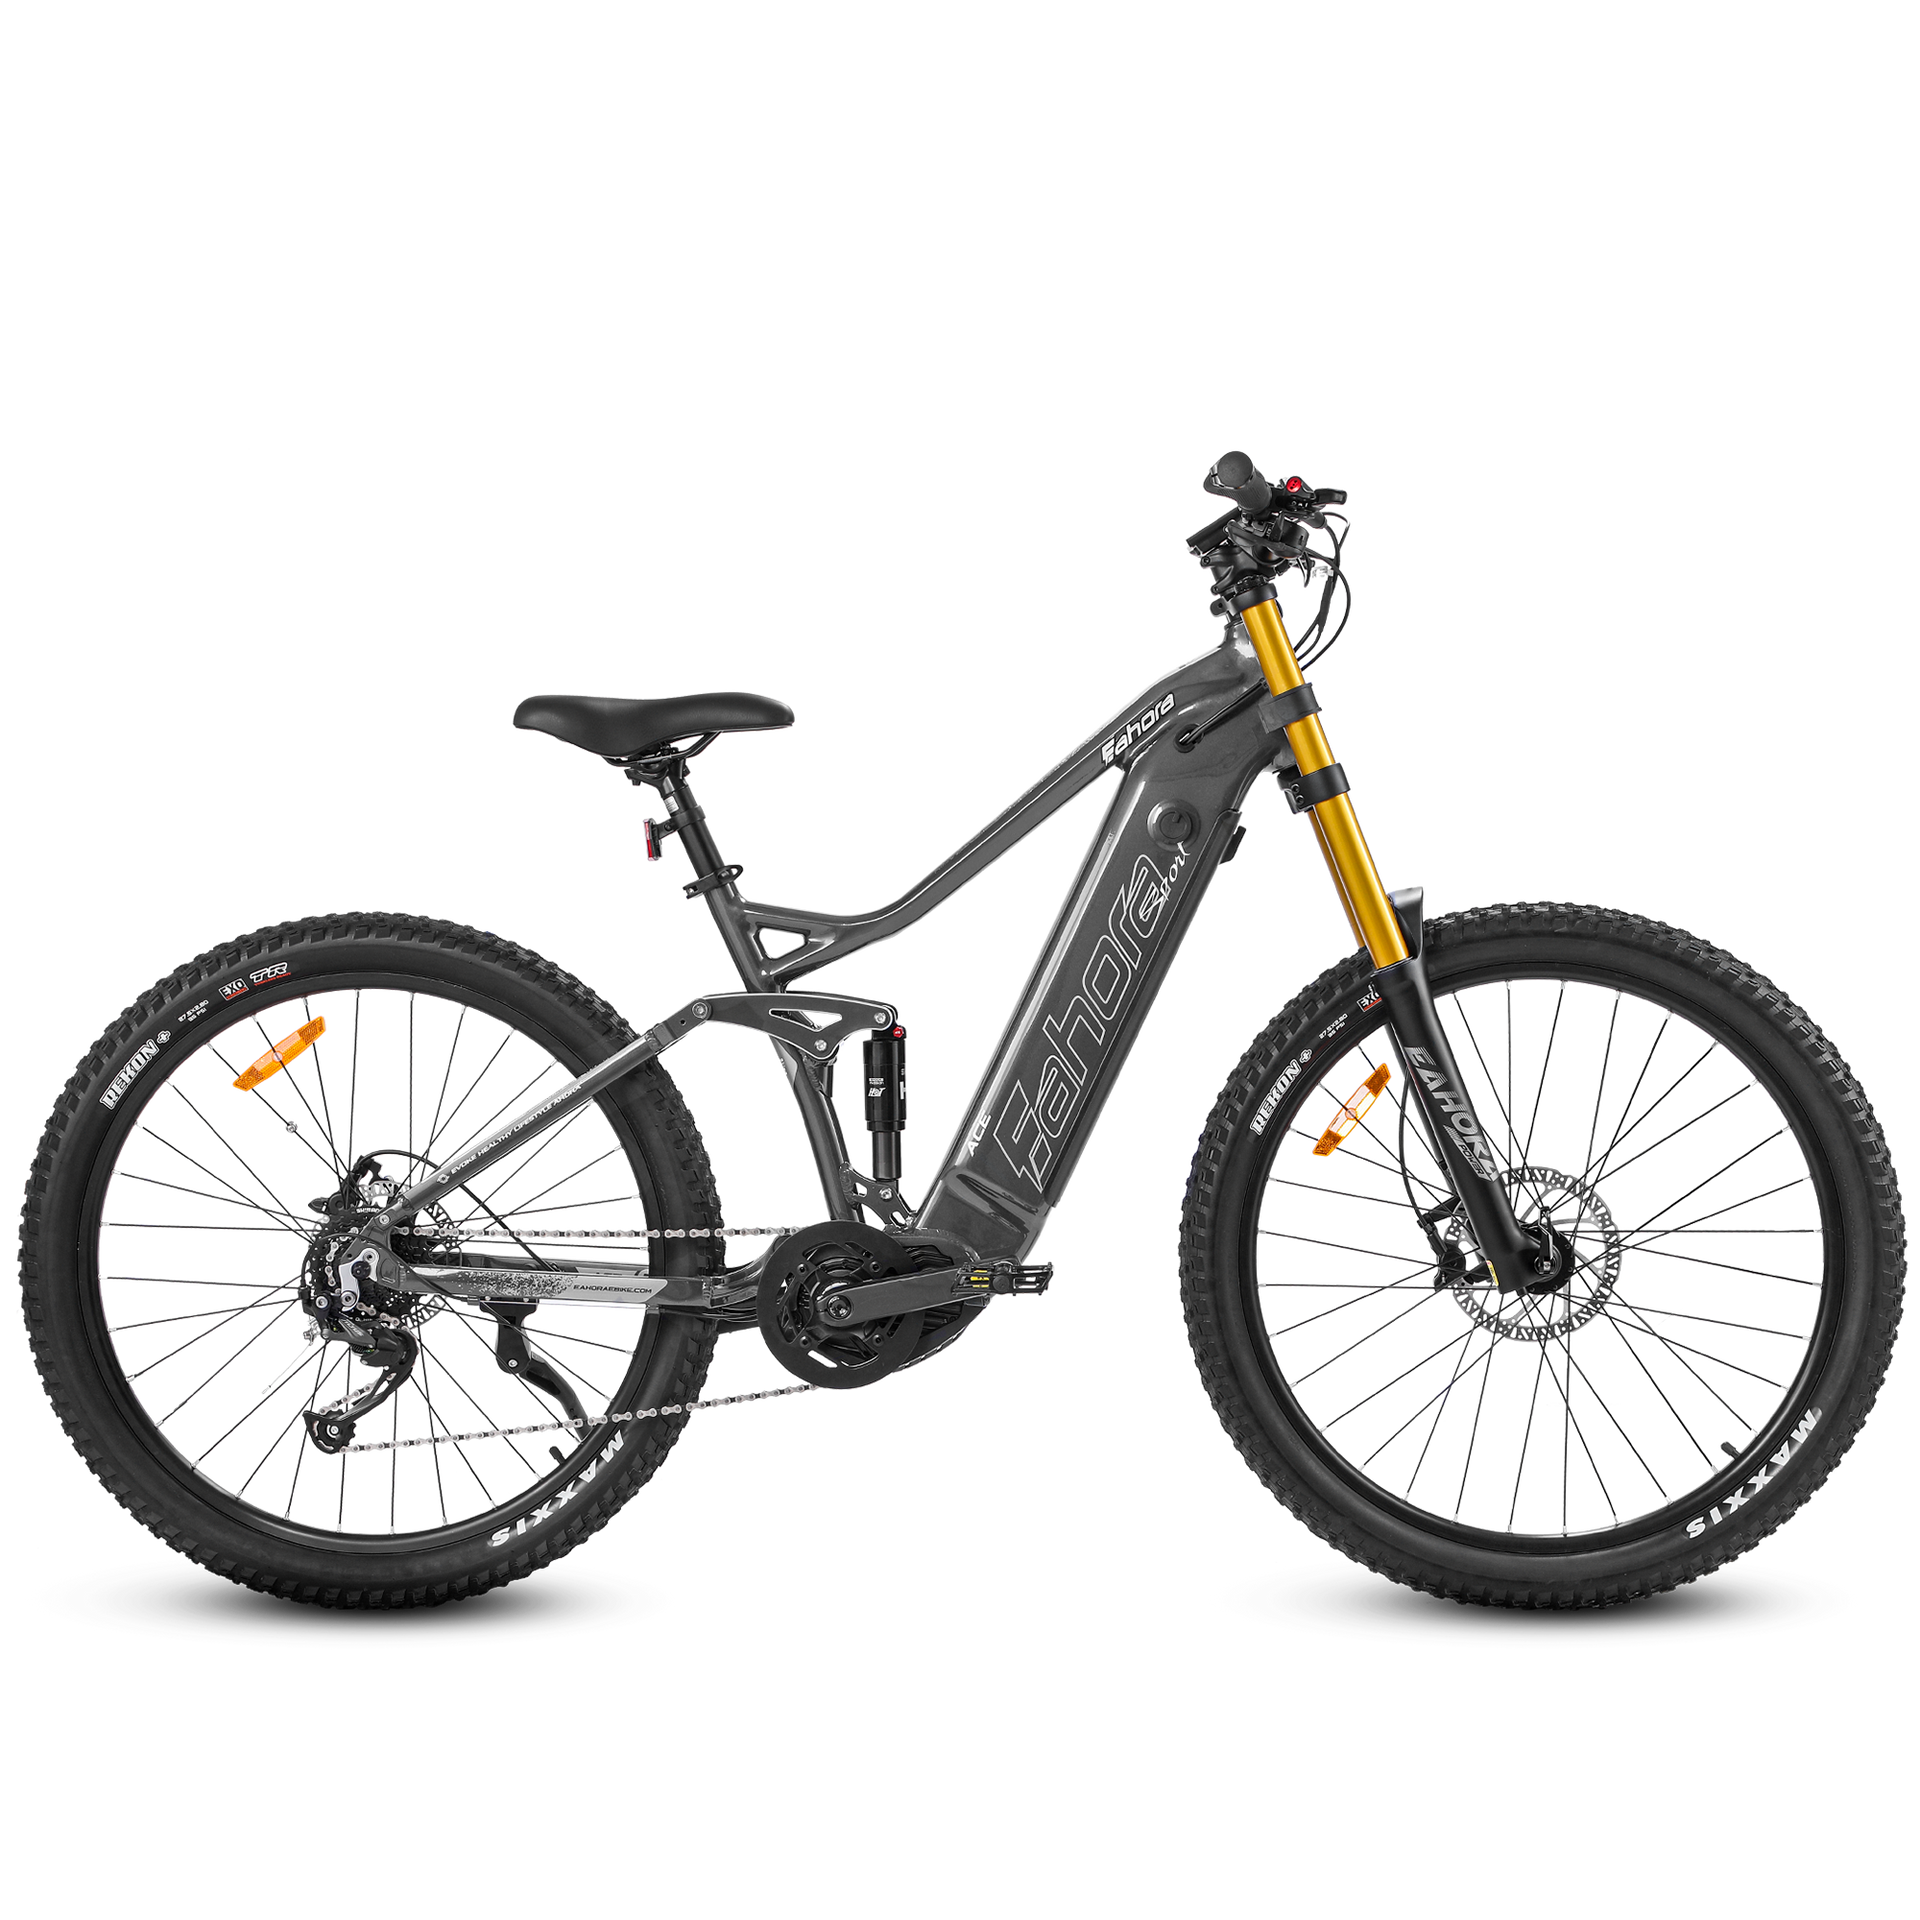 Mid Drive Electric Bike | Eahora ACE Electric Bike For Sale